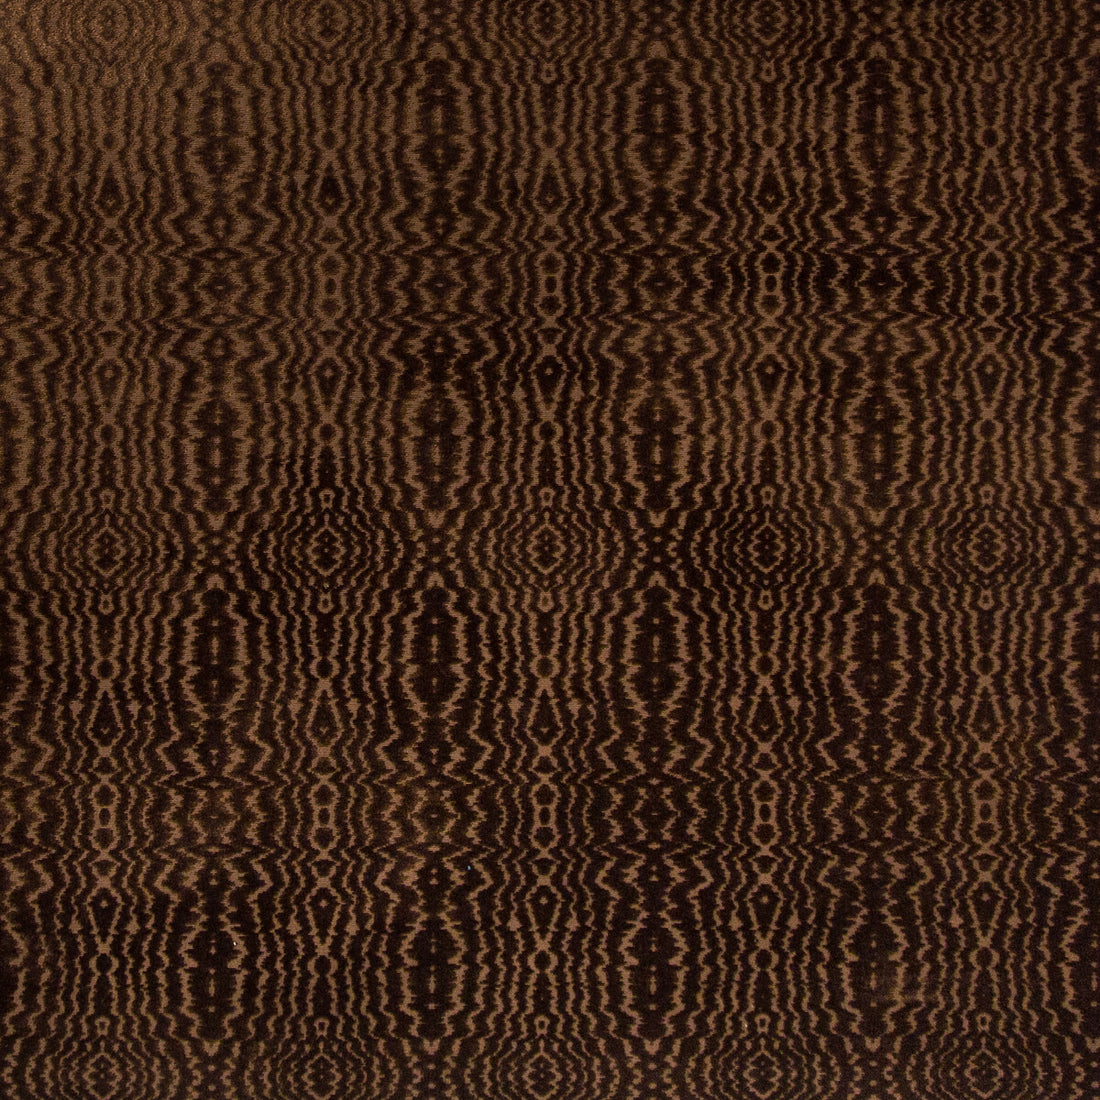 Callow Velvet fabric in umber color - pattern 2019119.68.0 - by Lee Jofa in the Harlington Velvets collection